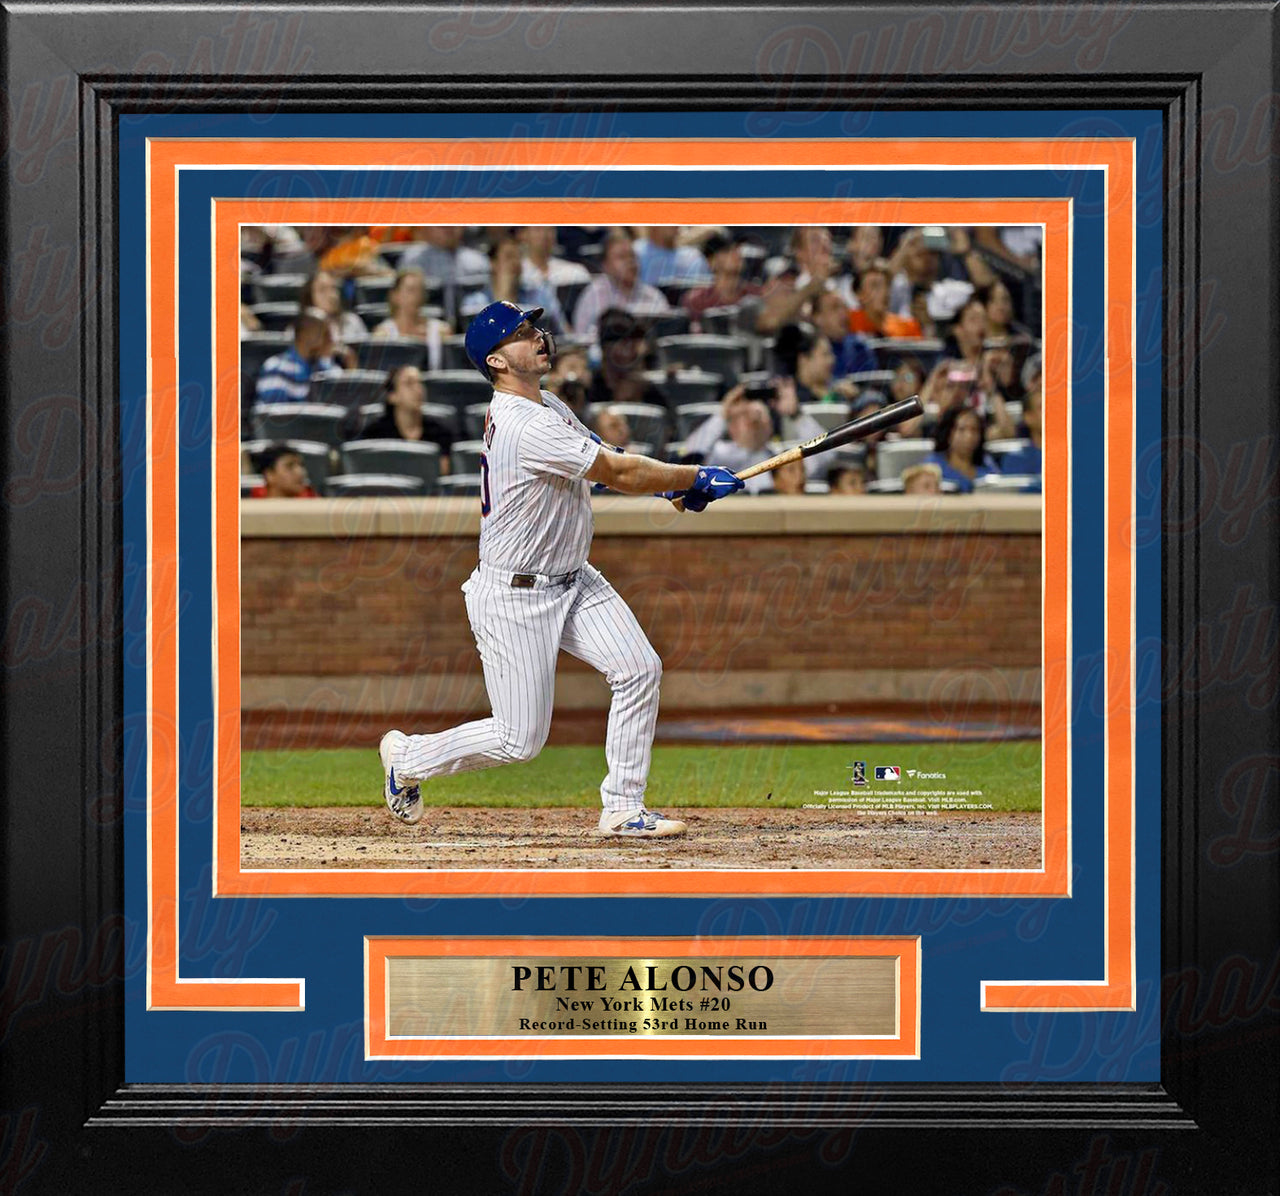 Pete Alonso Record-Breaking Home Run New York Mets 8" x 10" Framed Baseball Photo - Dynasty Sports & Framing 